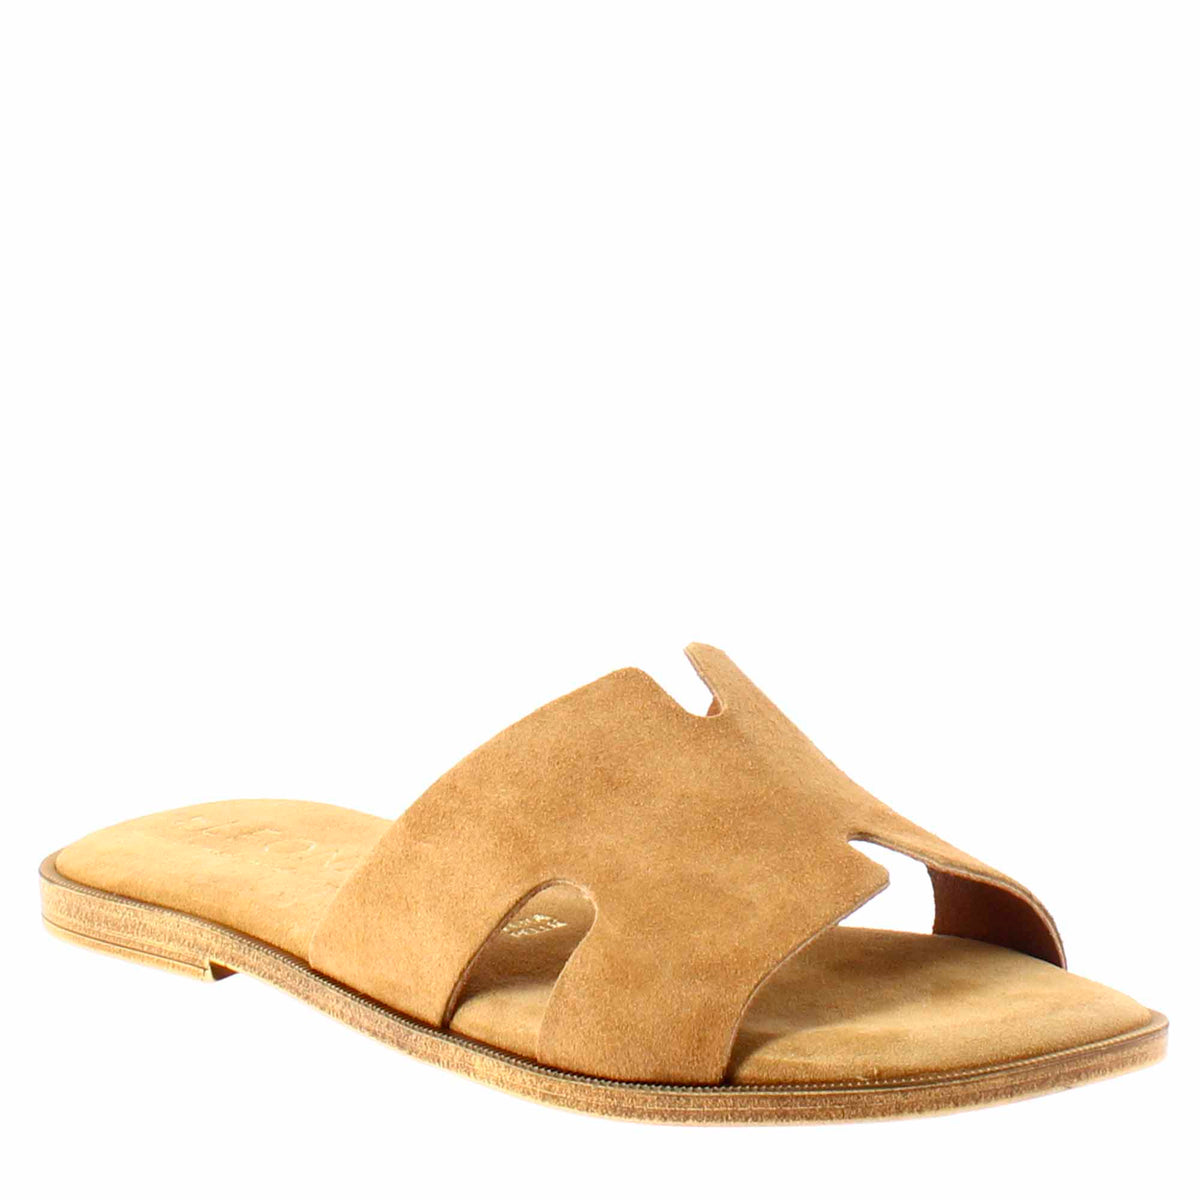 Women's H-shaped sandals in brown suede